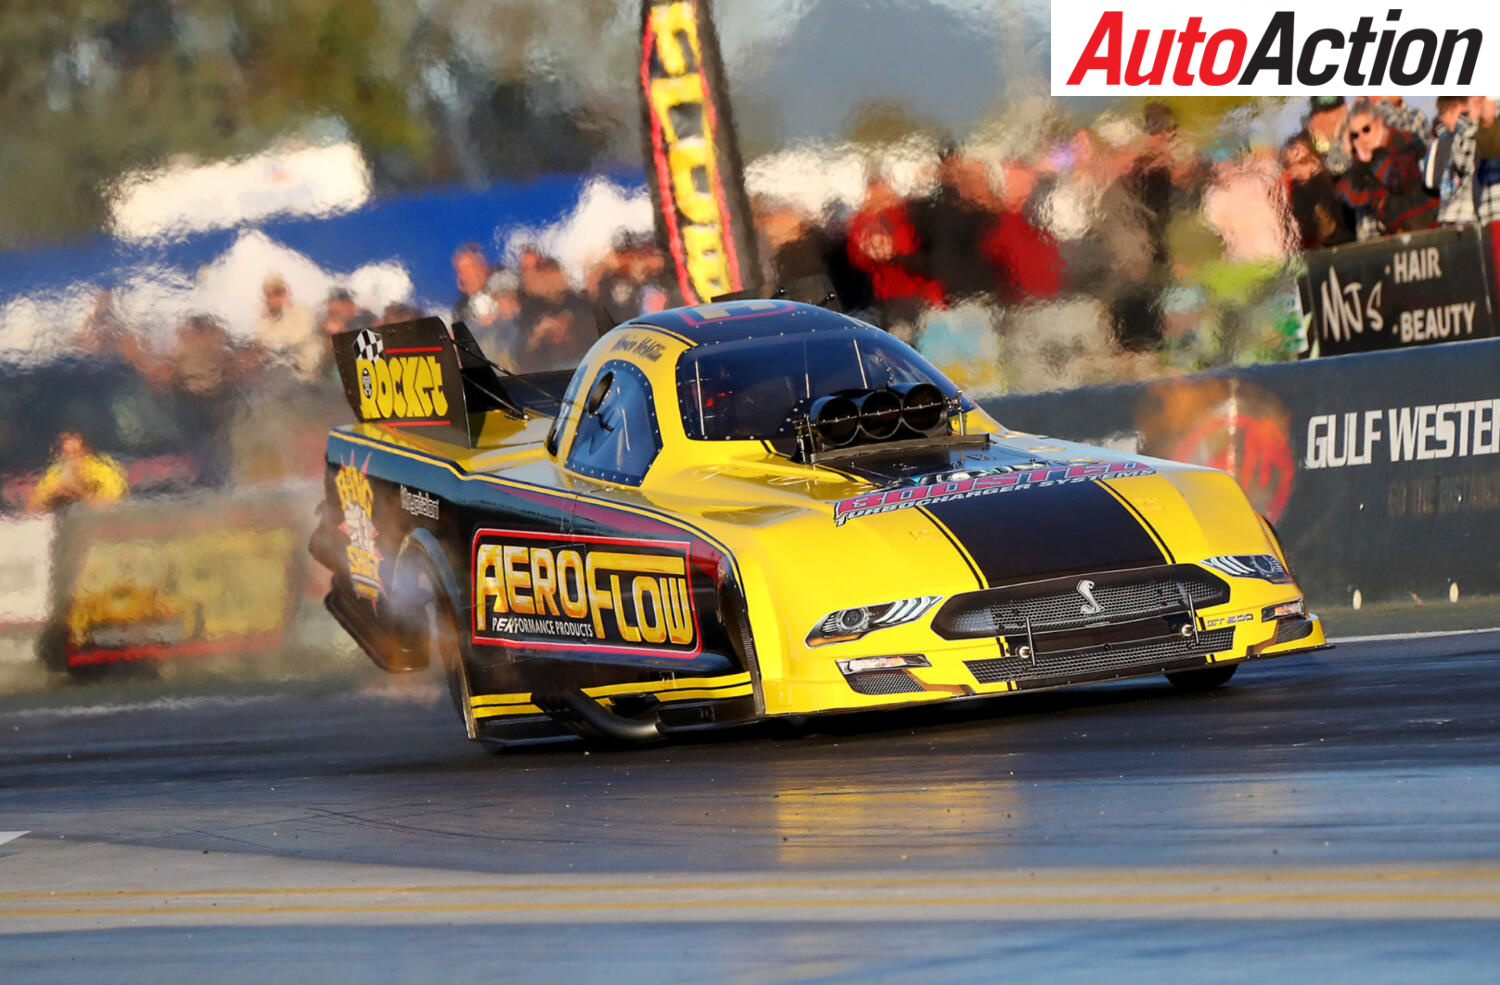 Winternationals shifting gears - Auto Action